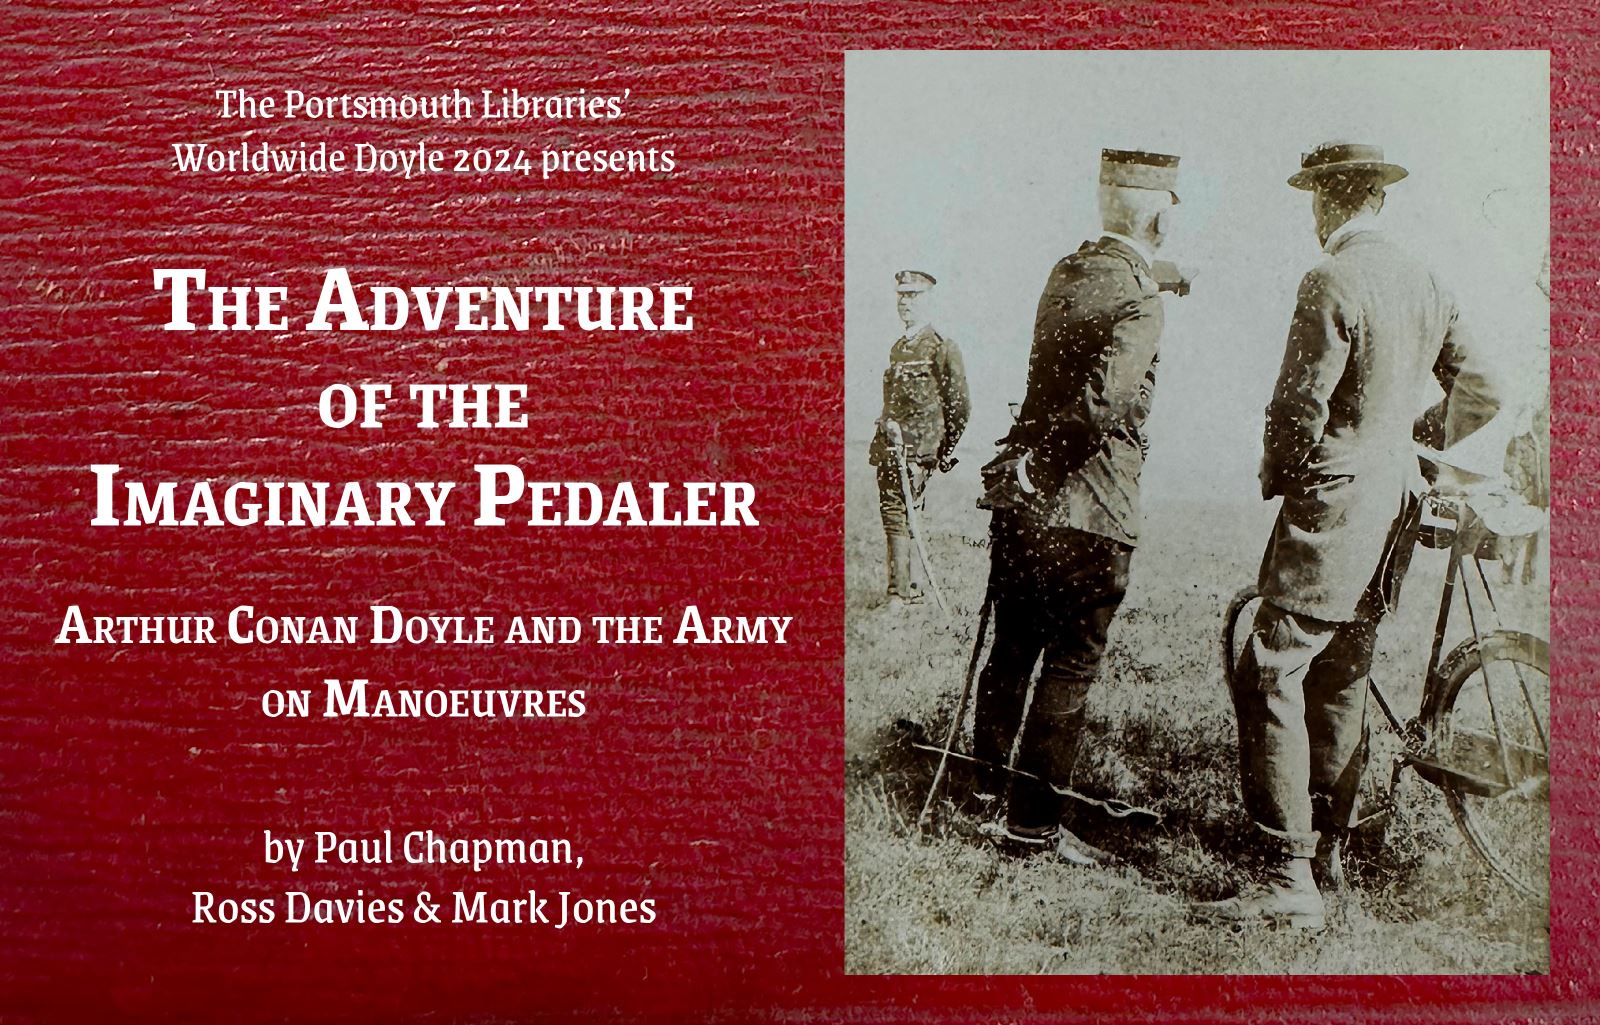 a grainy old photo of 3 men, one with a bike, alongside the following text: The Portsmouth Library's Worldwide Doyle 2024 presents The Adventure of the Imaginary Pedaler Arthur Conan Doyle and the Army on Manoeuvres by Paul Chapman, Ross Davies & Mark Jones